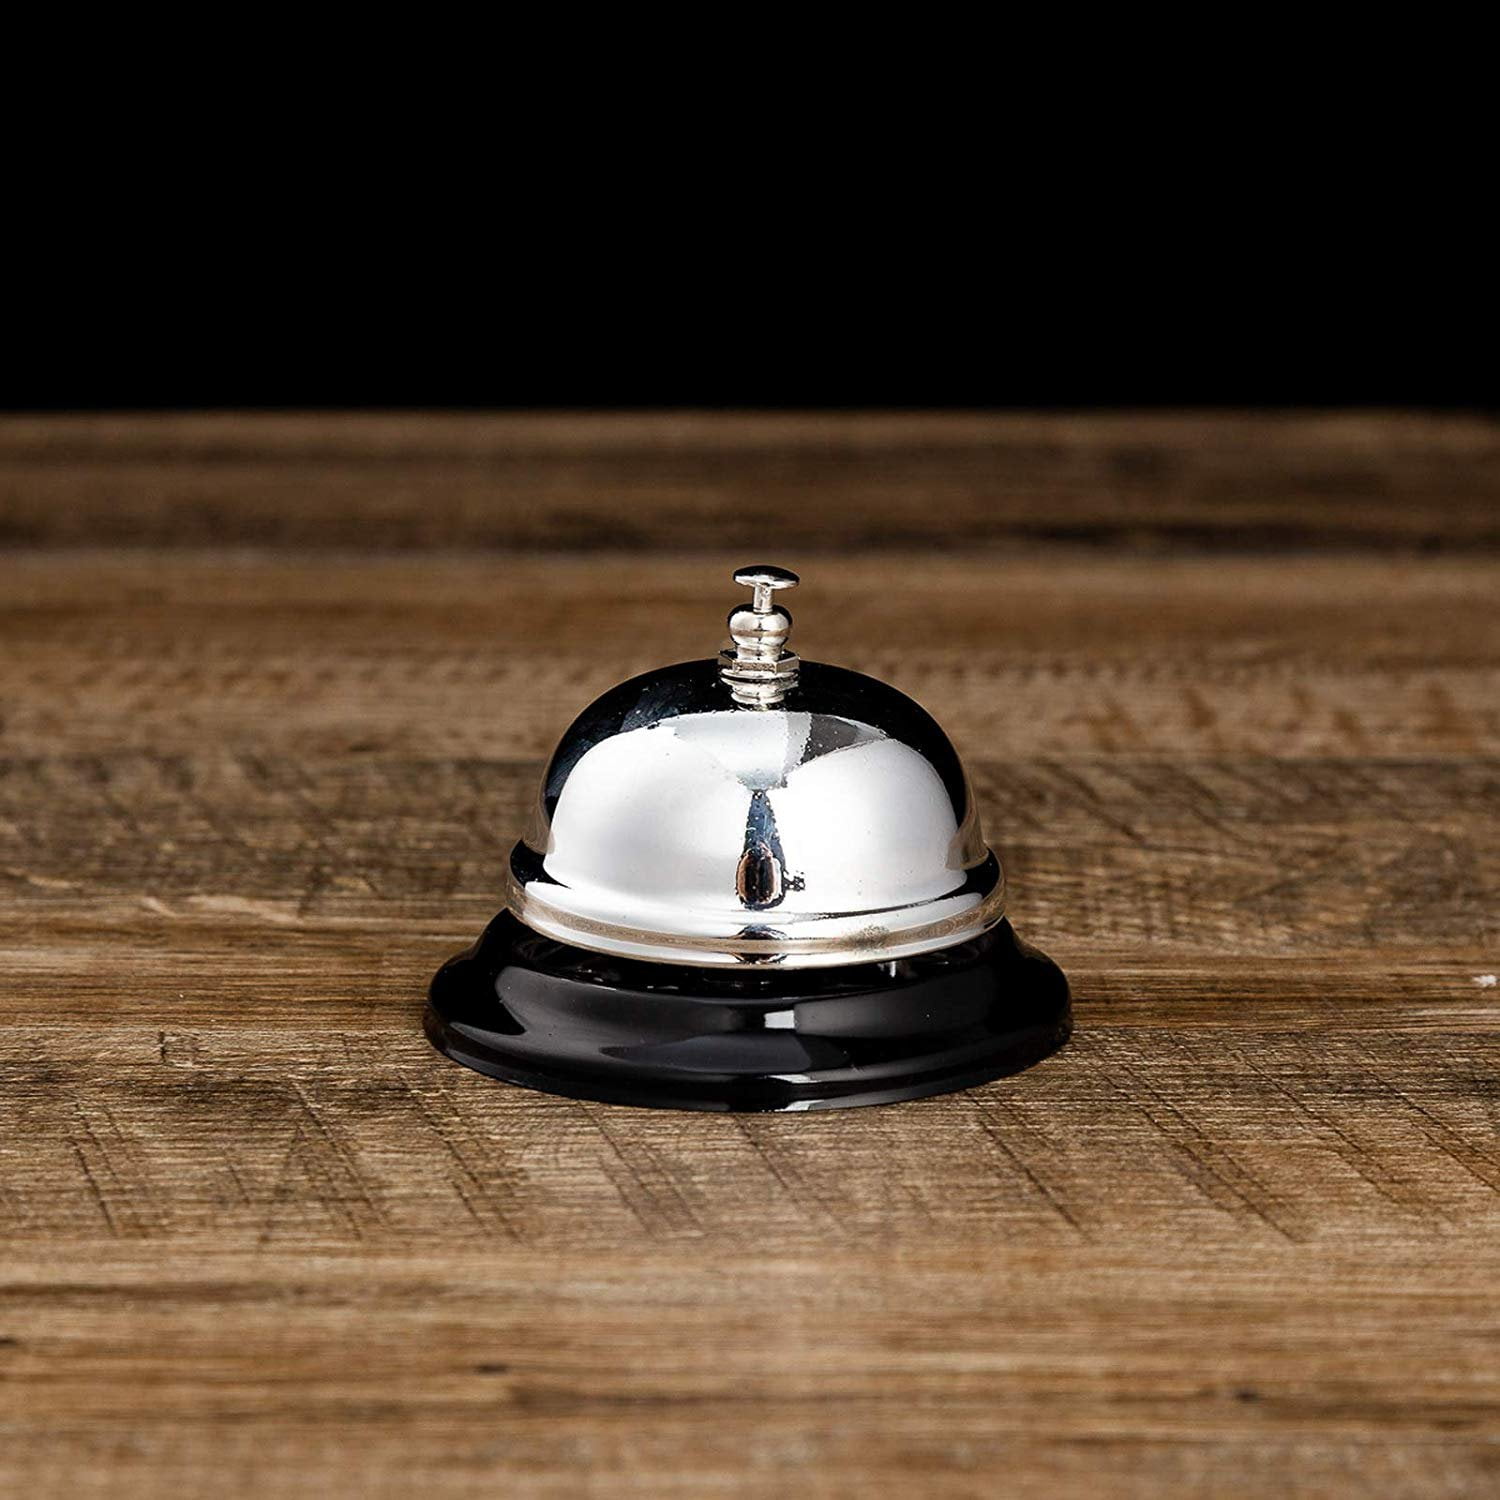 Chrome Finish Reception Areas Restaurants 3.35 Inch Diameter Hospitals 2 Bells Silver ASIAN HOME Call Bell All-Metal Desk Bell Service Bell for Hotels Schools Customer Service 